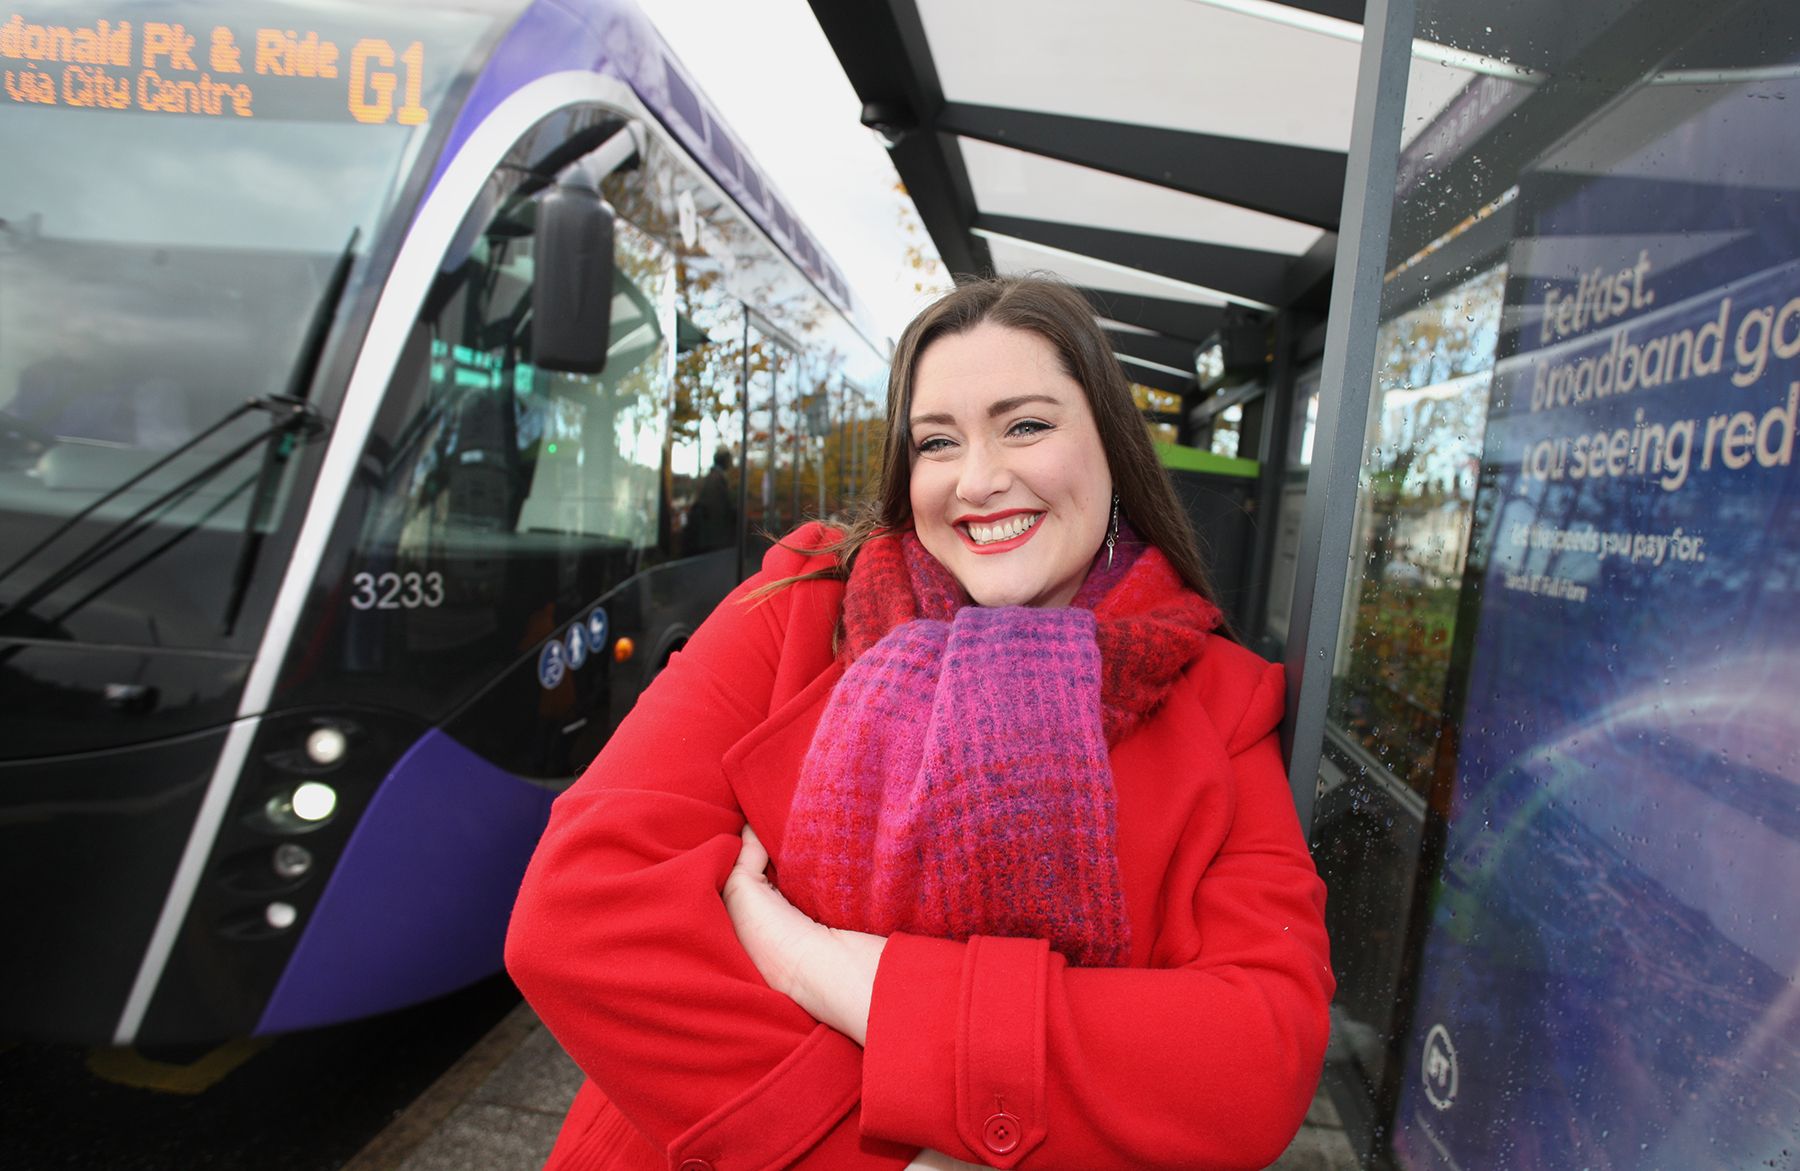 ALL ABOARD: Andersonstown woman Caoimhe Ní Chathail at a Glider stop